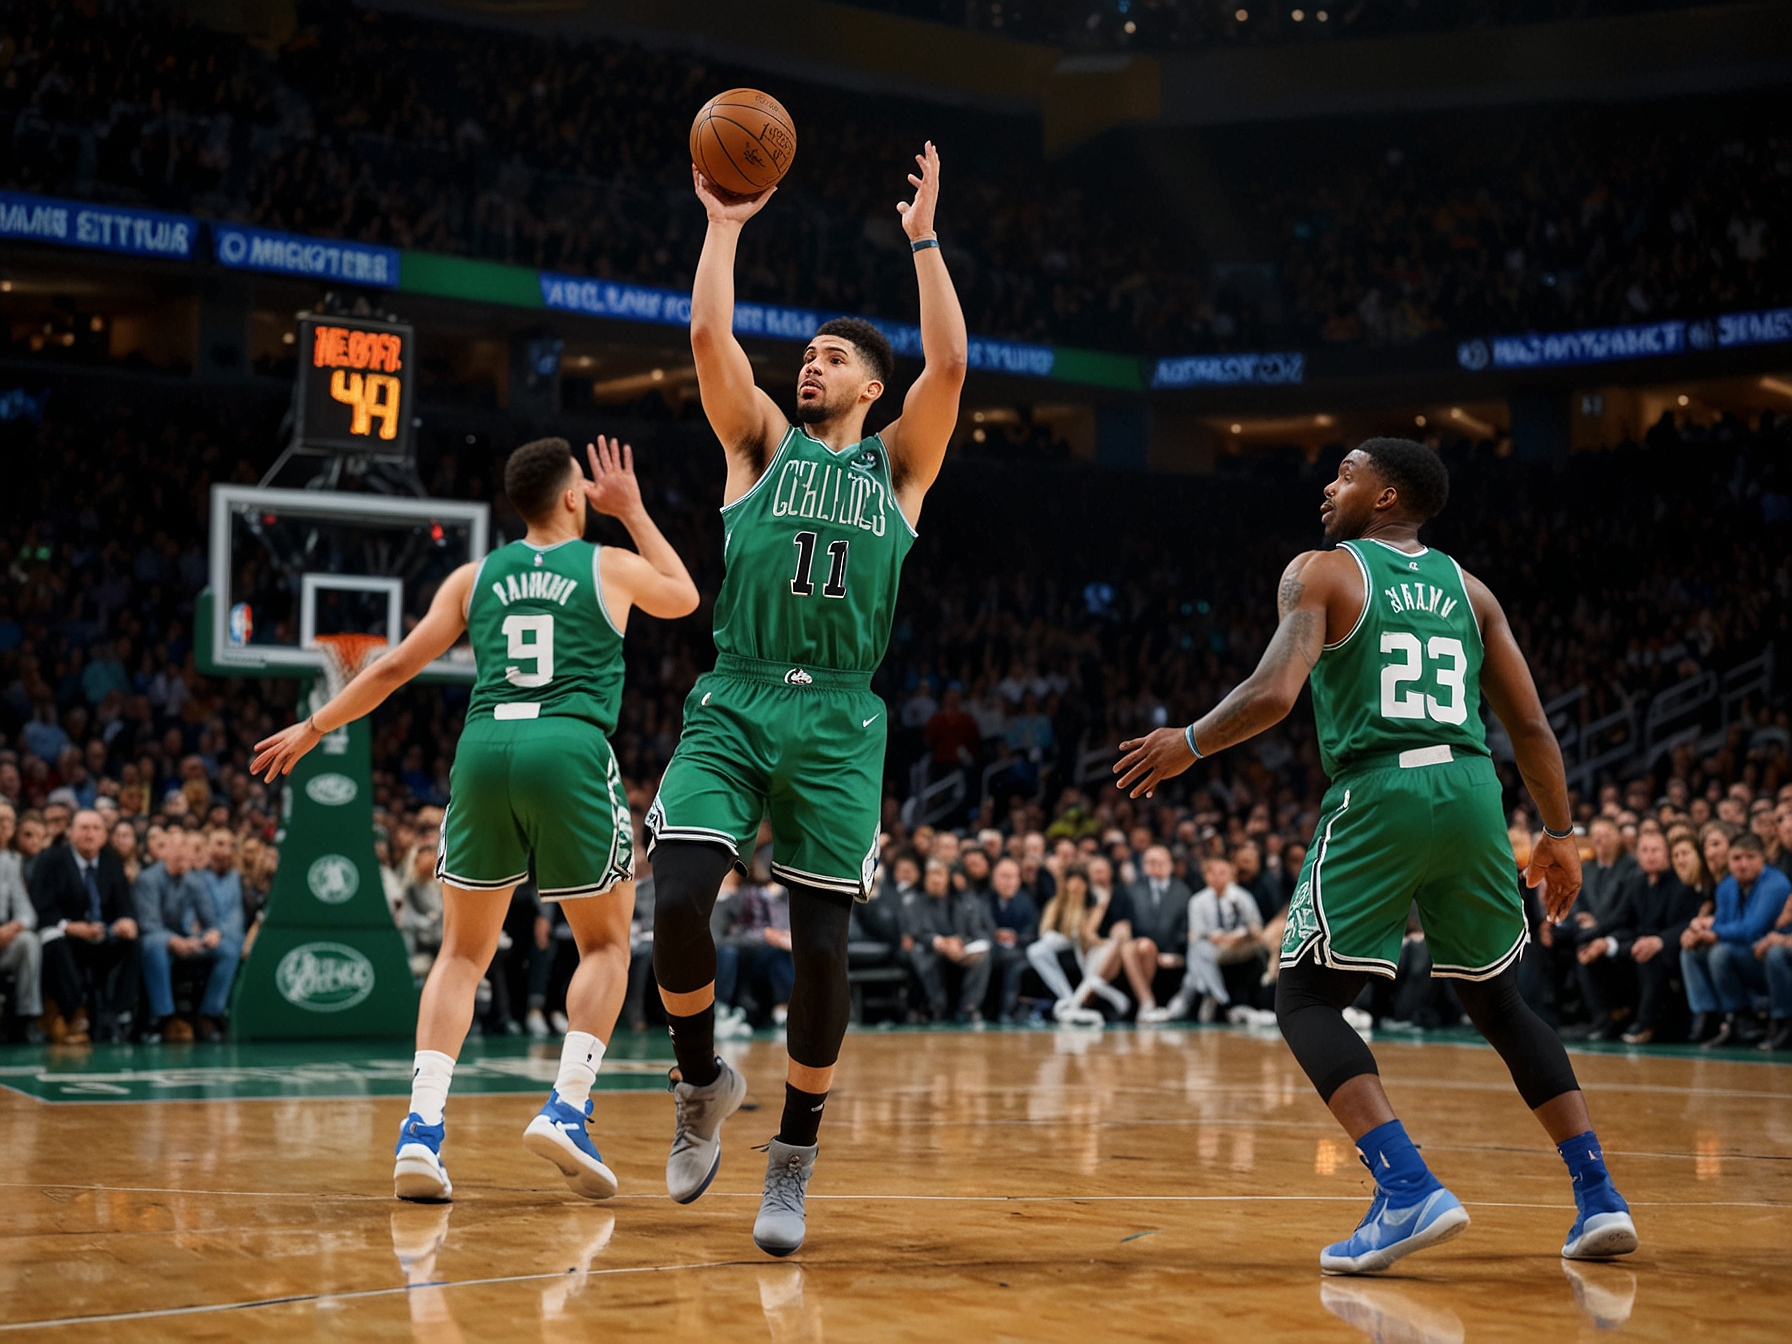 Jayson Tatum elevates for a three-pointer as Dallas Mavericks defenders scramble to contest the shot. The Celtics star led his team with sharp shooting in the decisive game five at TD Garden.